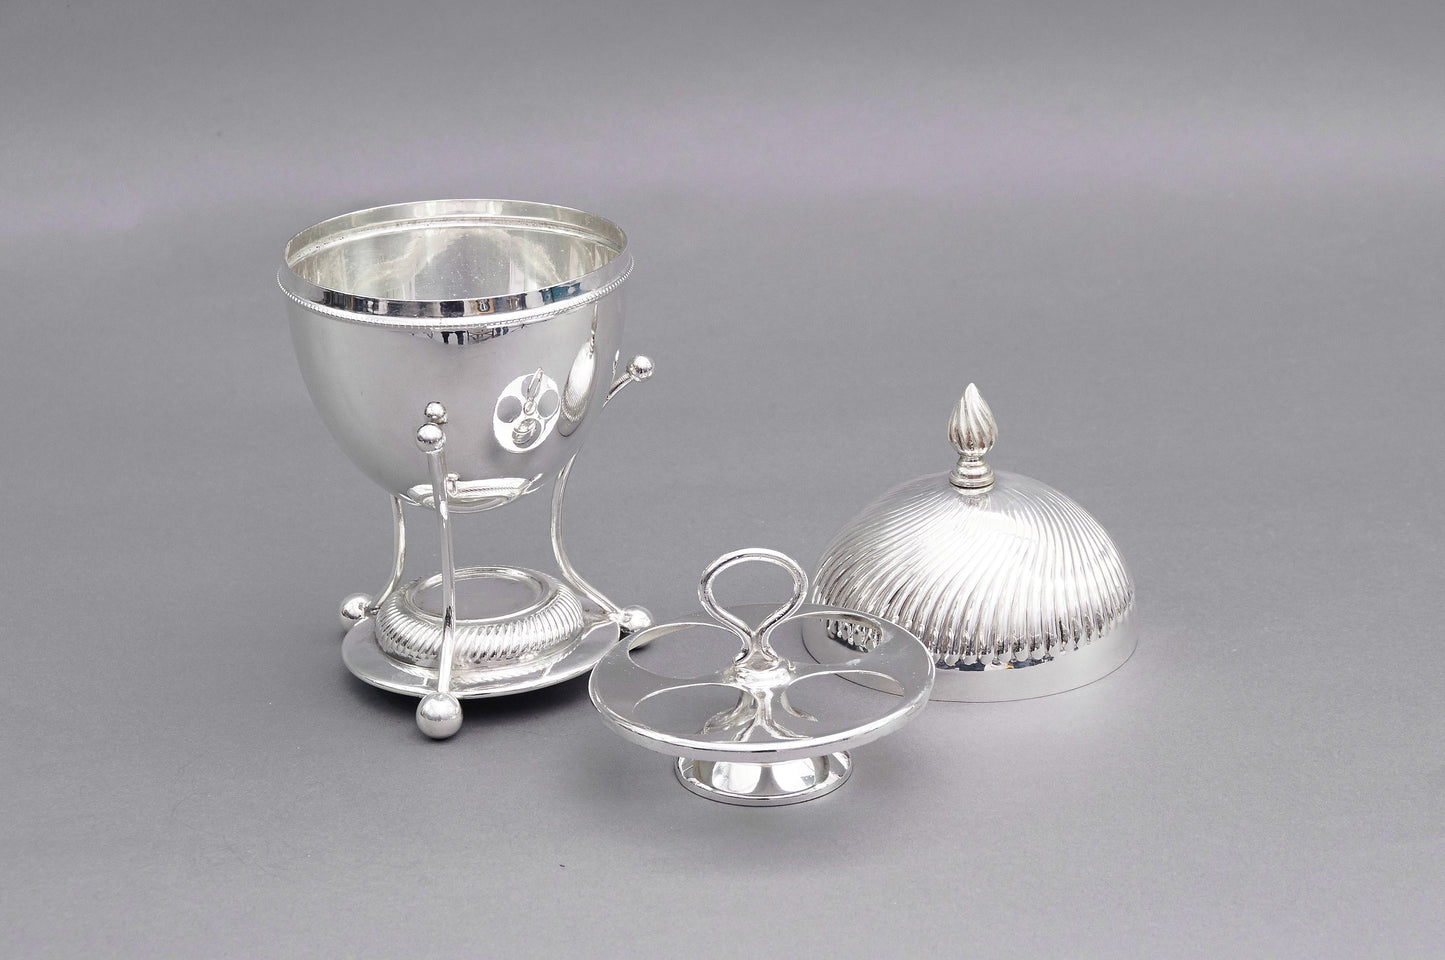 The Groom Lance - Silver Egg Coddler with Rippled Lid